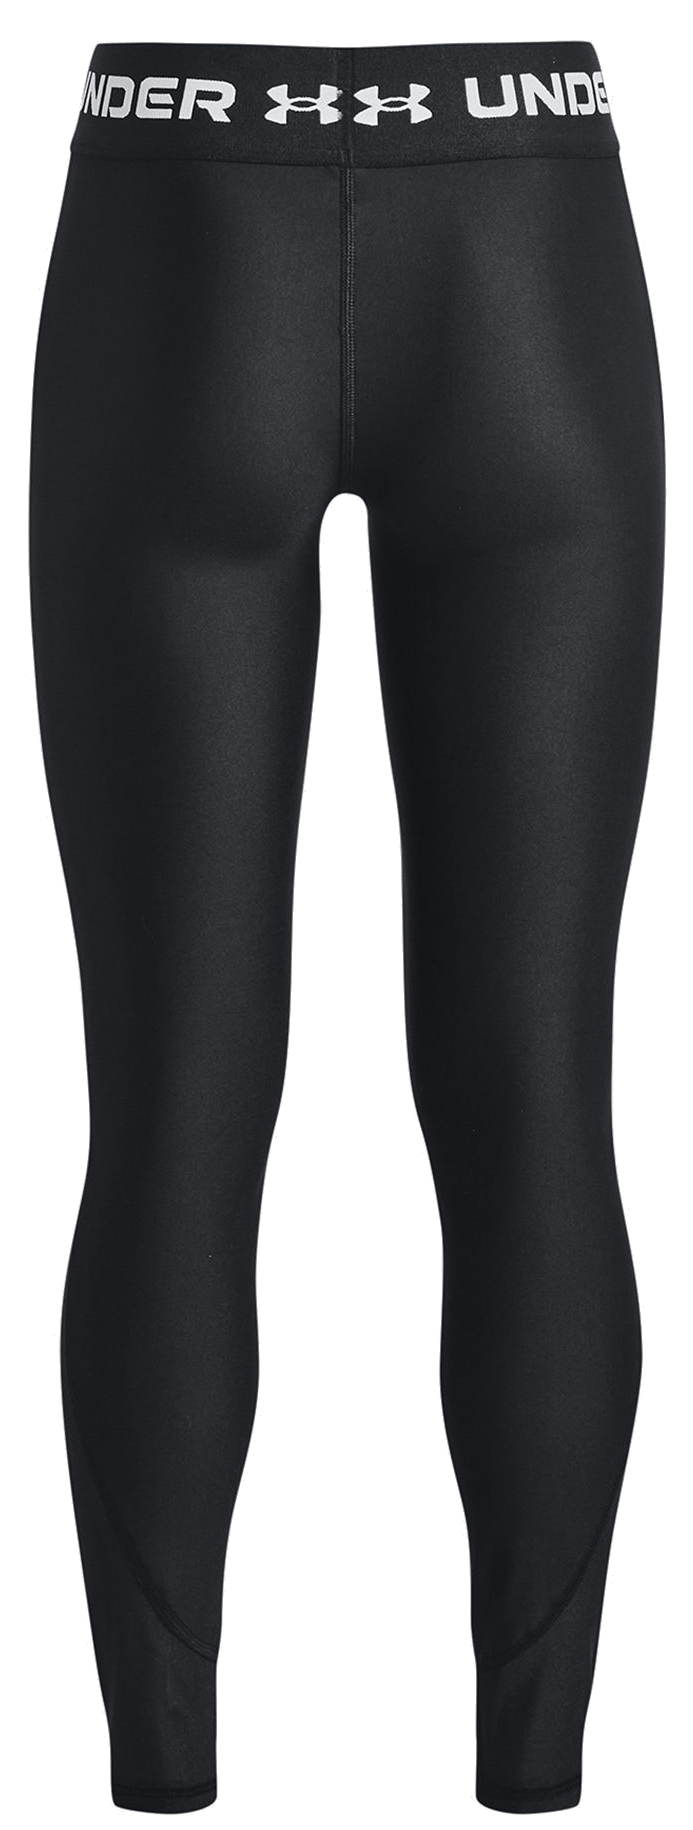 https://i1.t4s.cz/products/1373954-001/under-armour-under-armour-armour-legging-498200-1373954-002.jpg